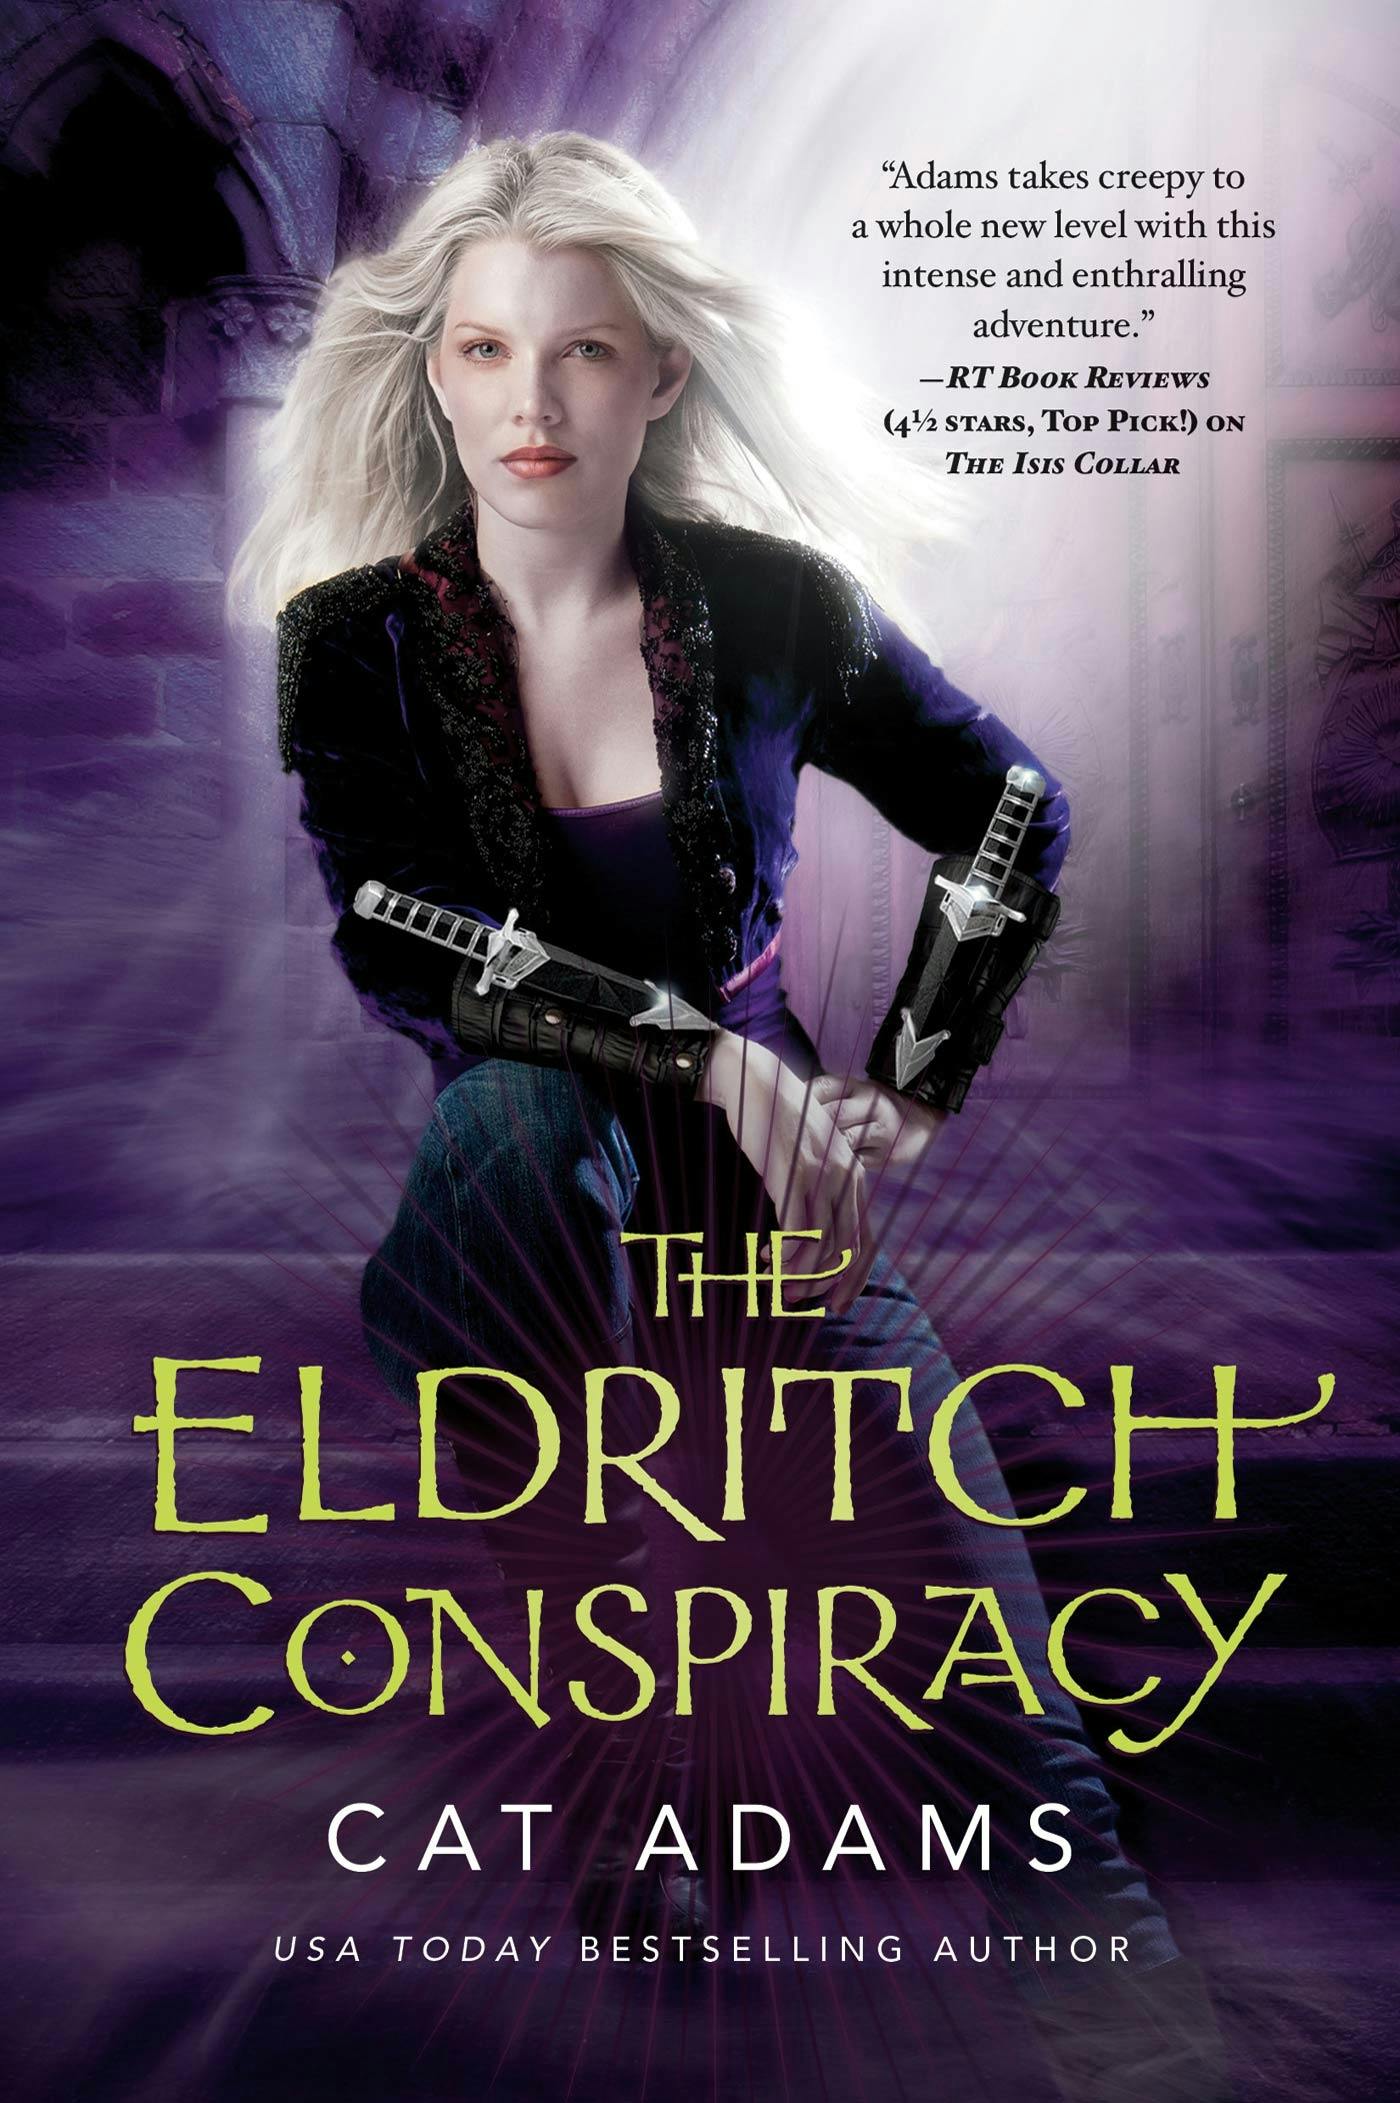 Cover for the book titled as: The Eldritch Conspiracy